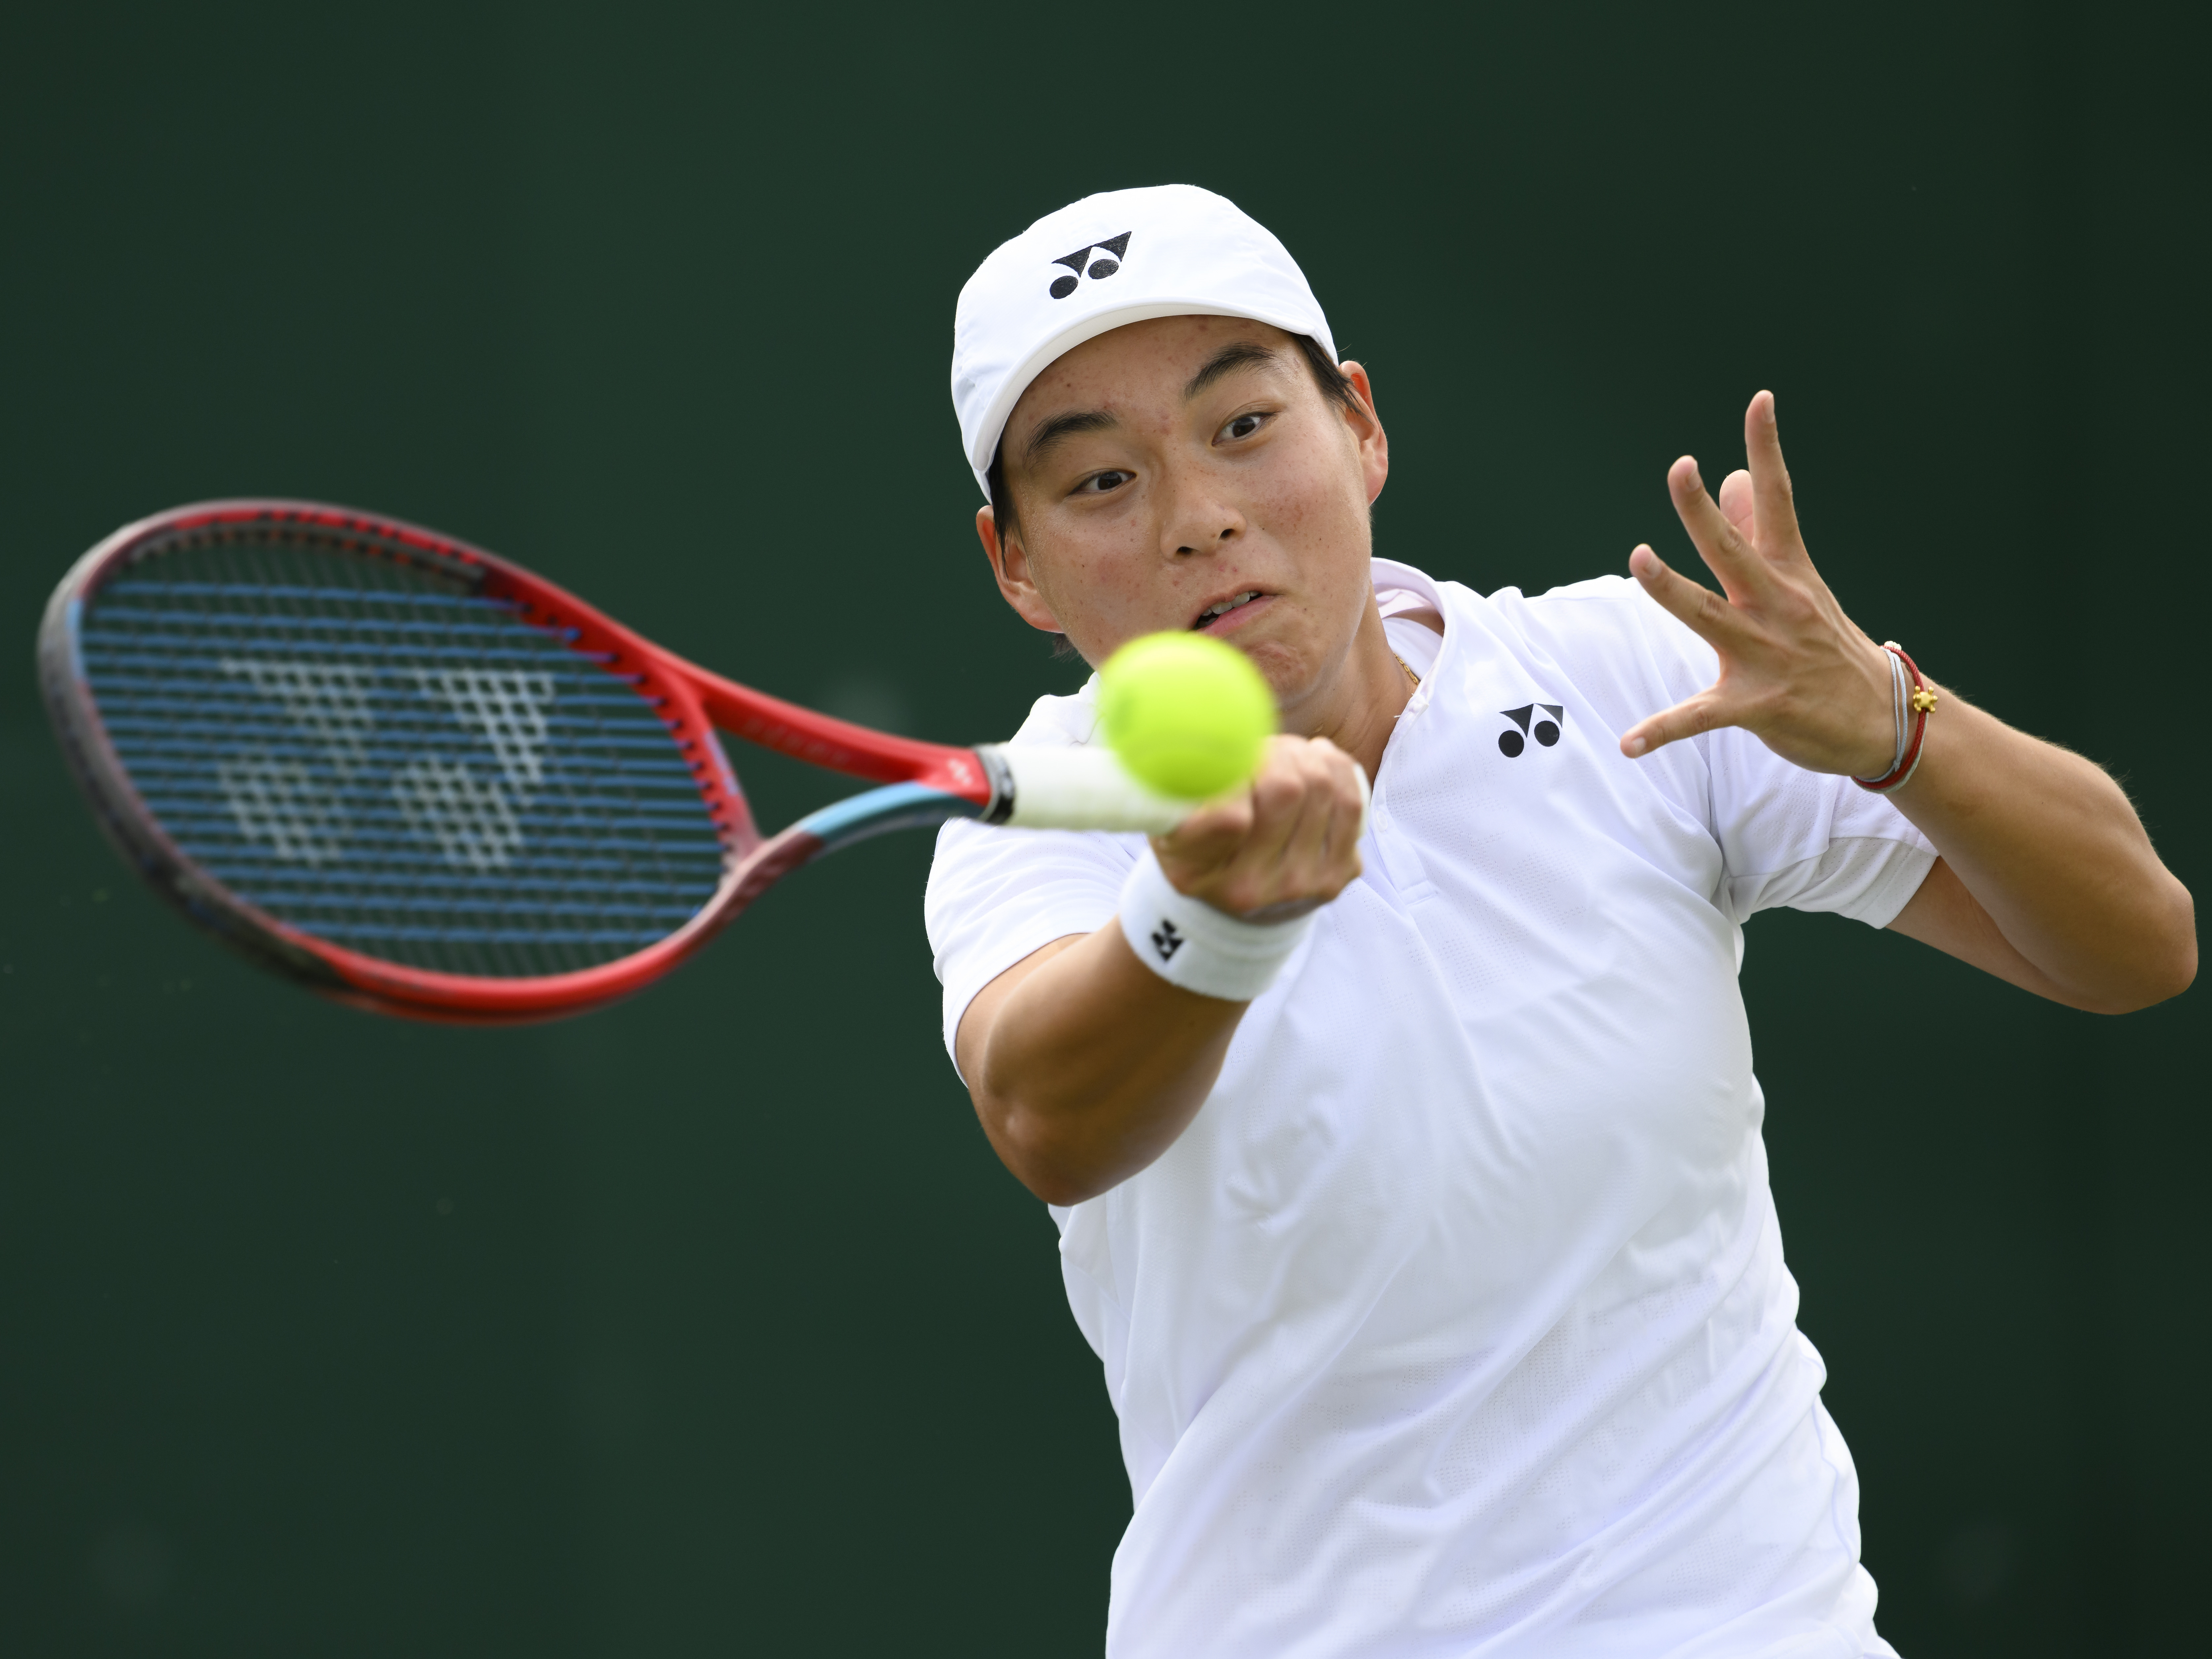 Bai Zhuoxuan of China competes in the Wimbledon Championships women's singles qualifying match against Anna Brogan of Britain at Community Sport Centre Roehampton in London, England, June 29, 2023. /CFP